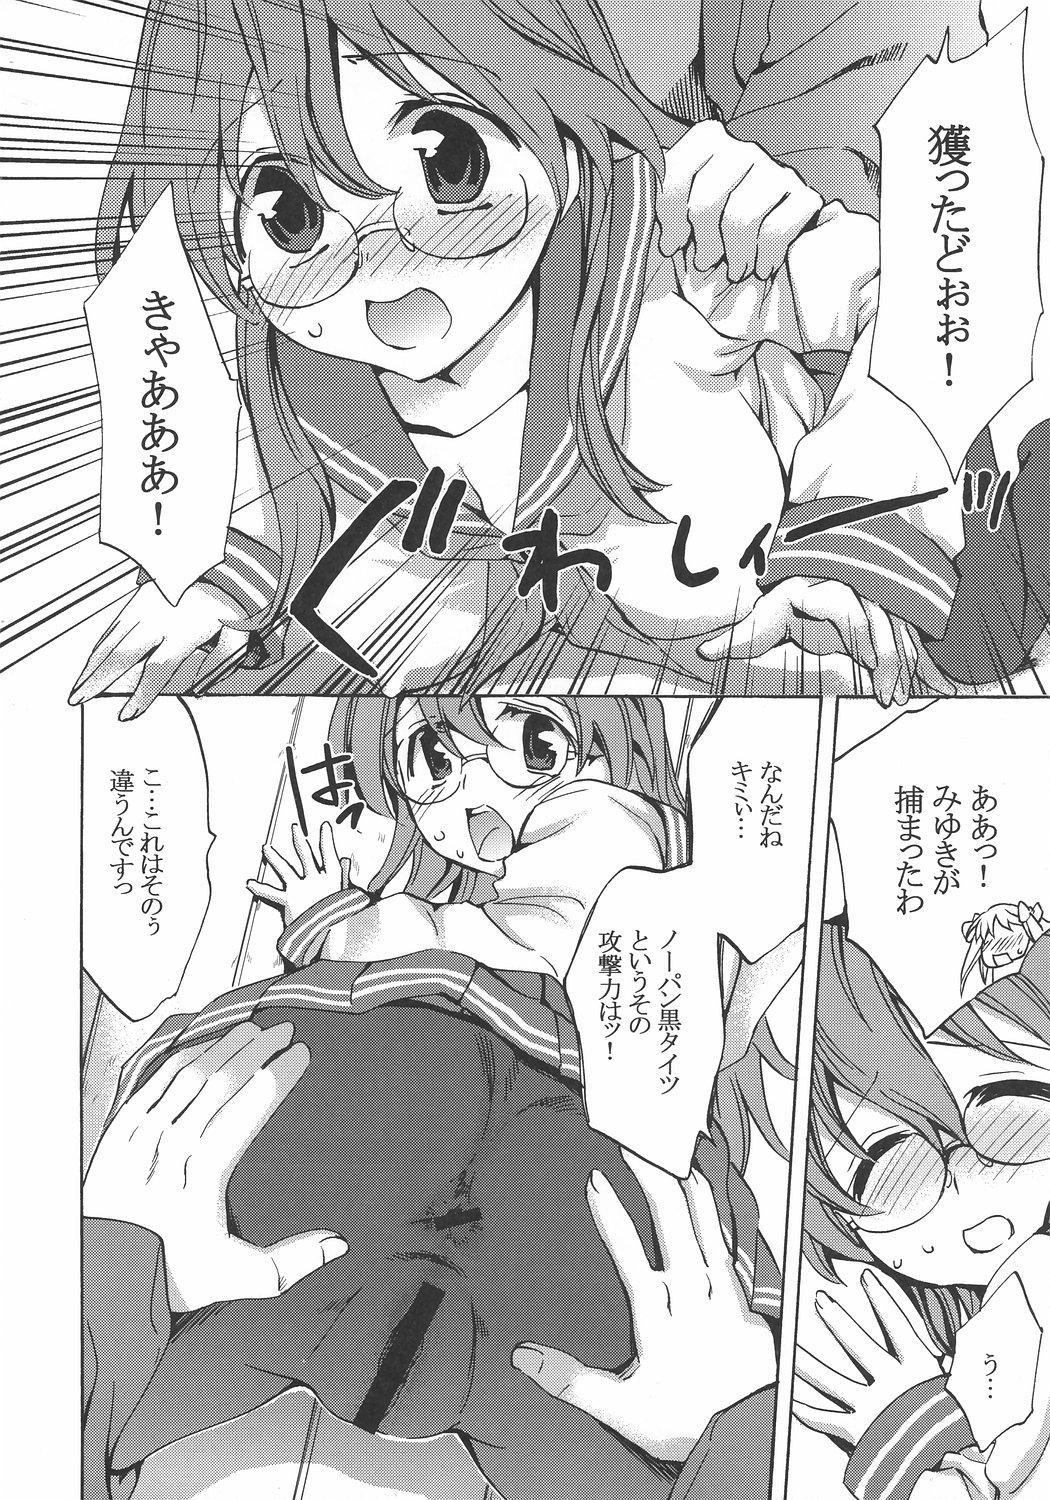 Asses Megane, Megane!! - Lucky star Pete - Page 9